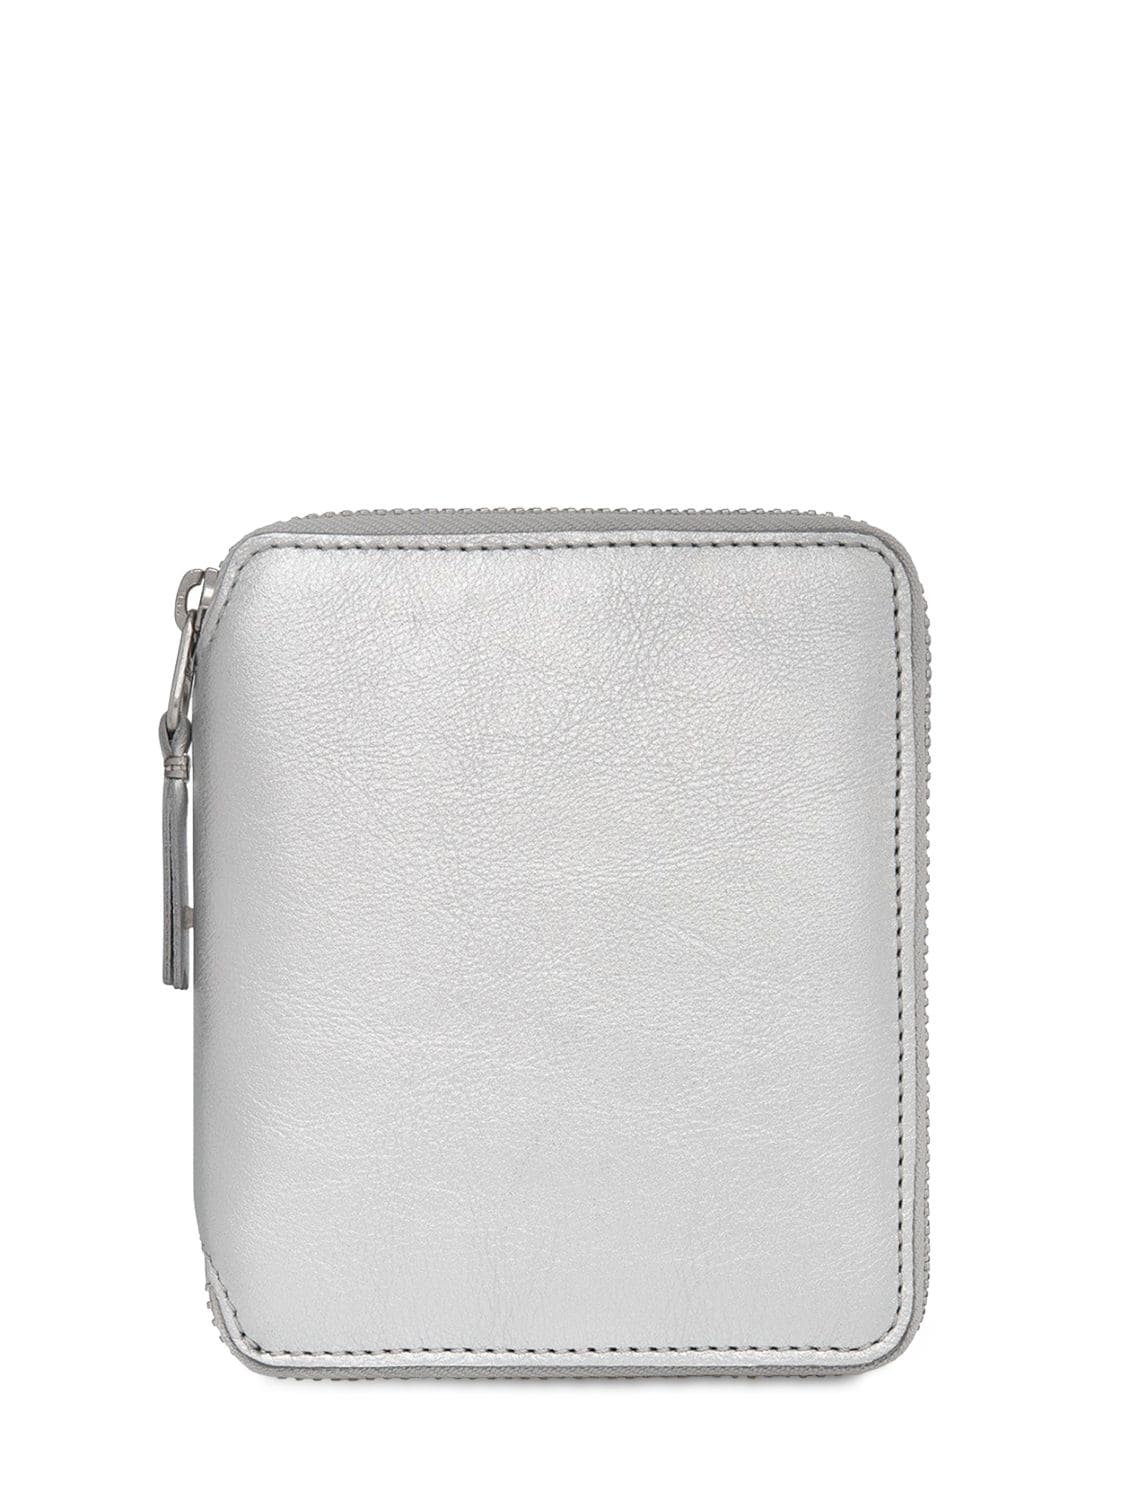 Image of Silver Leather Zip-around Wallet